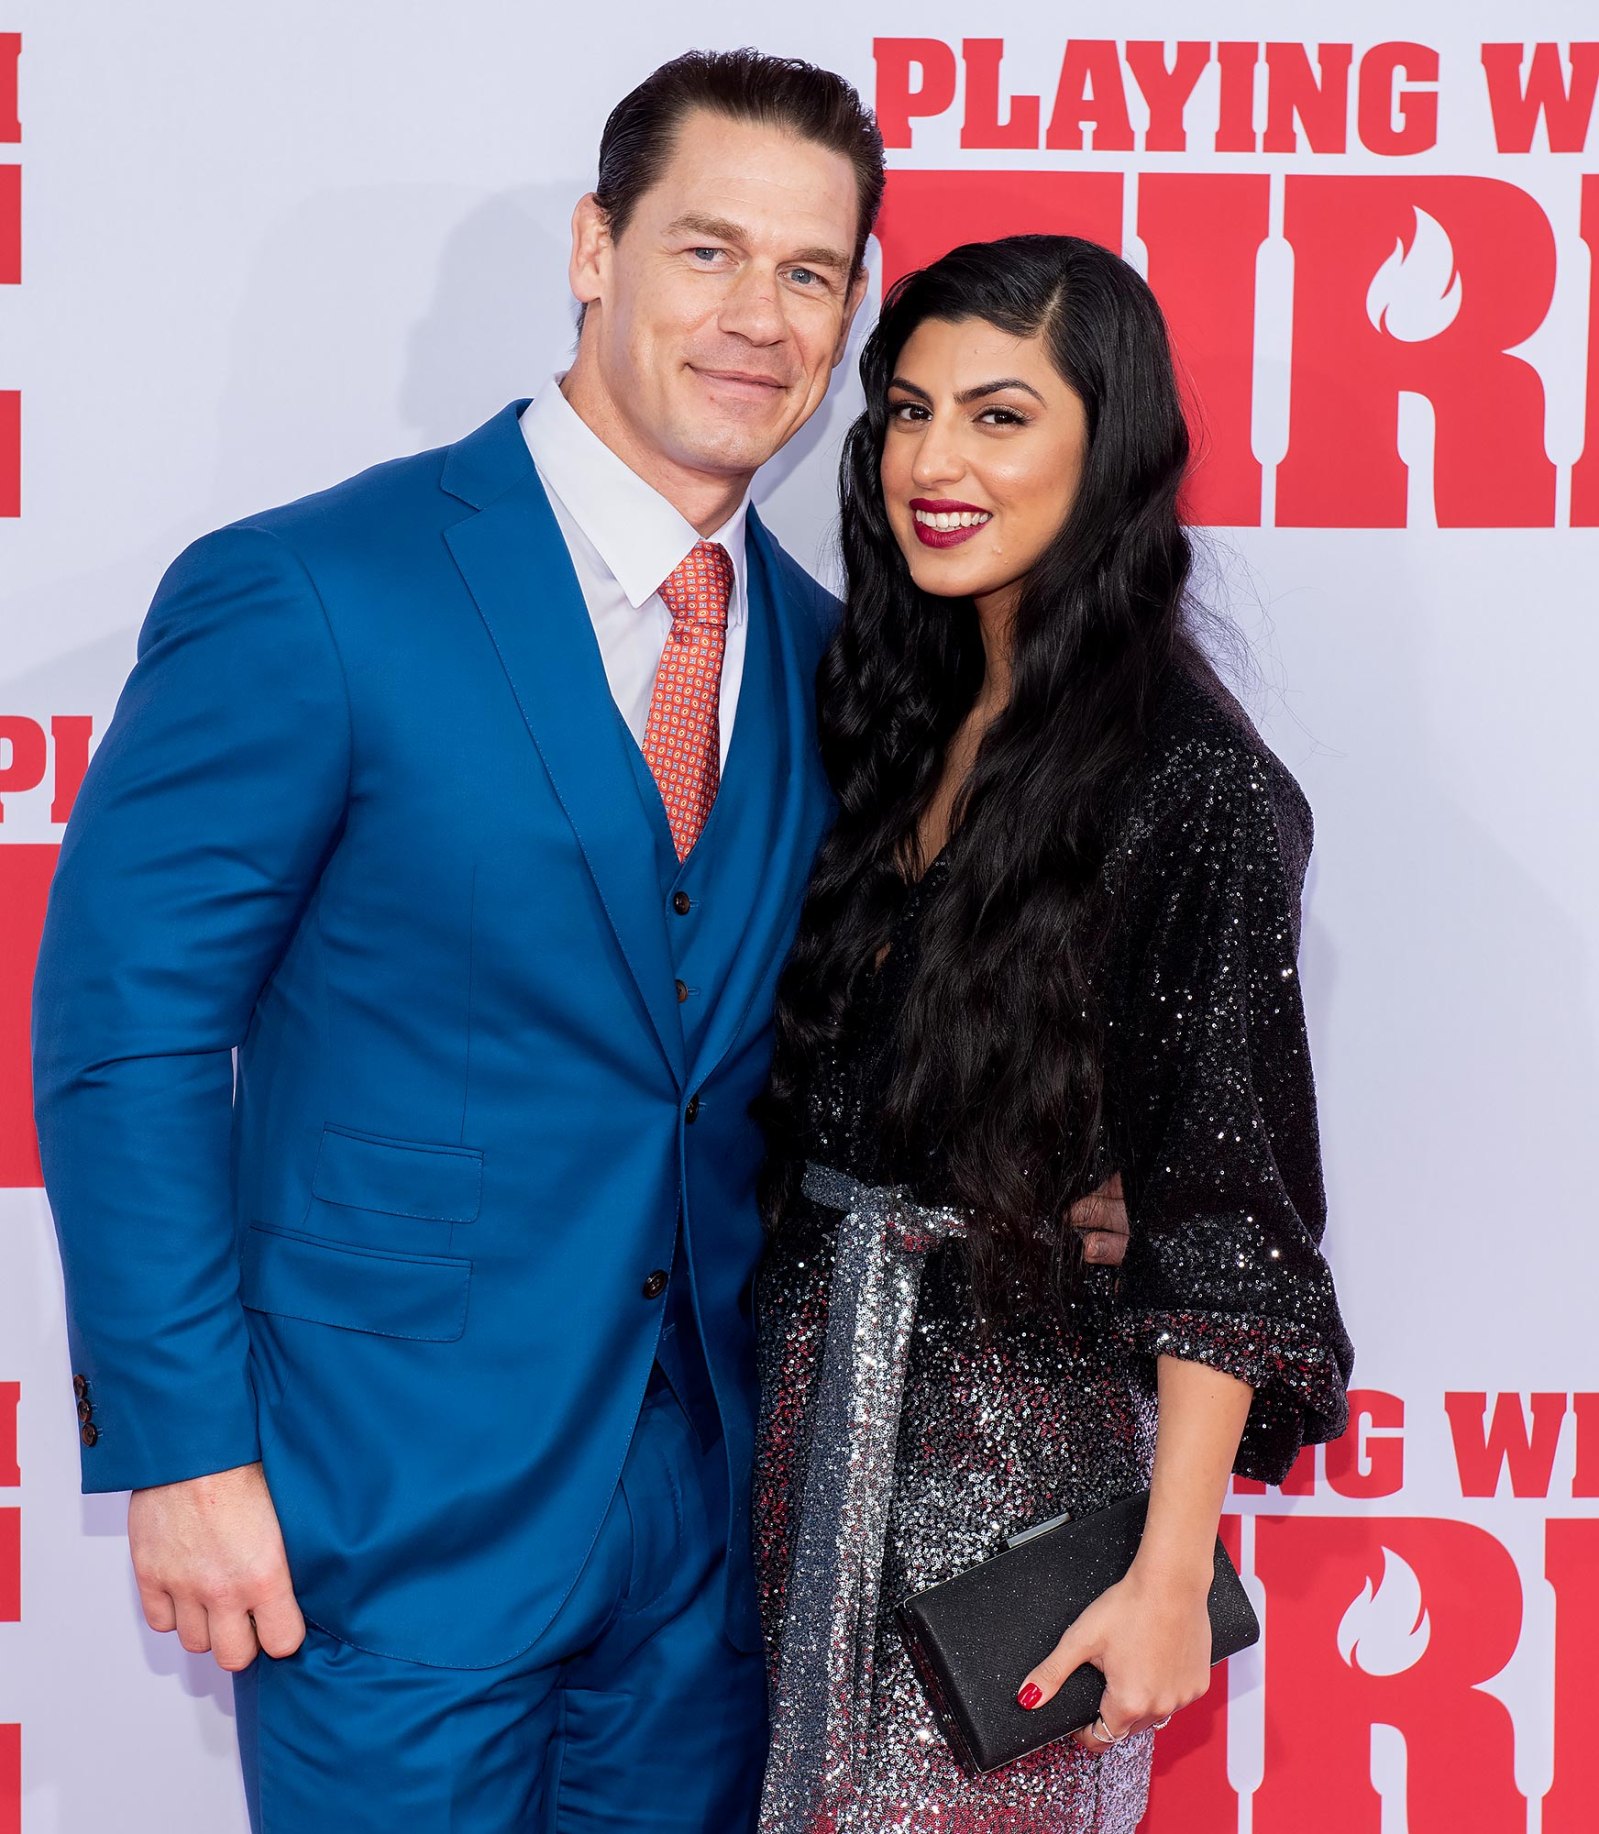 John Cena Admits He ‘Was Such a Dick’ When He Met Shay Shariatzadeh ...